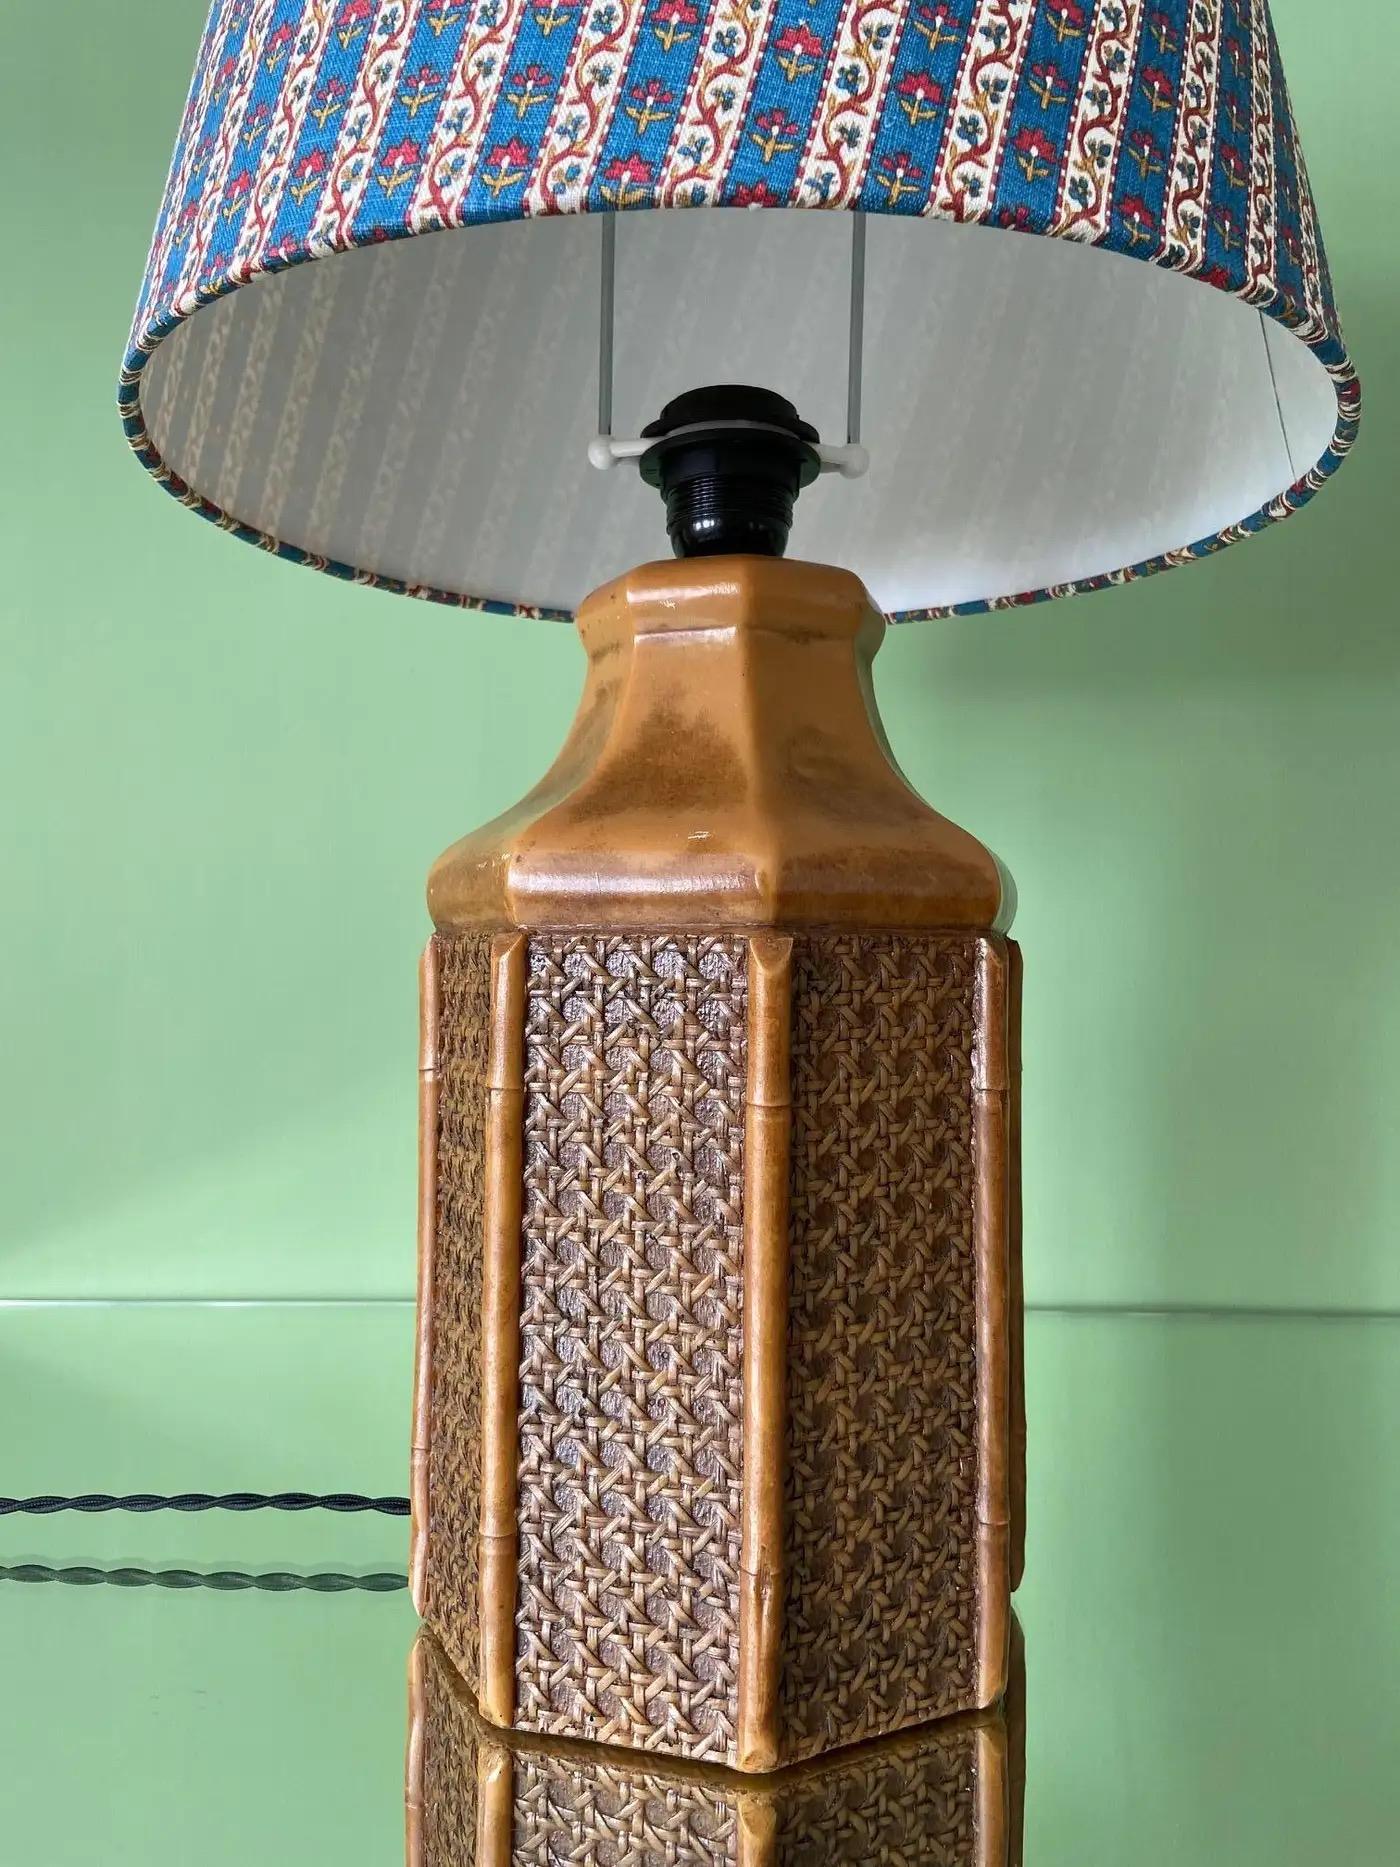 French Vintage Table Lamp with Bamboo and Cane Webbing Details, France, 20th Century For Sale